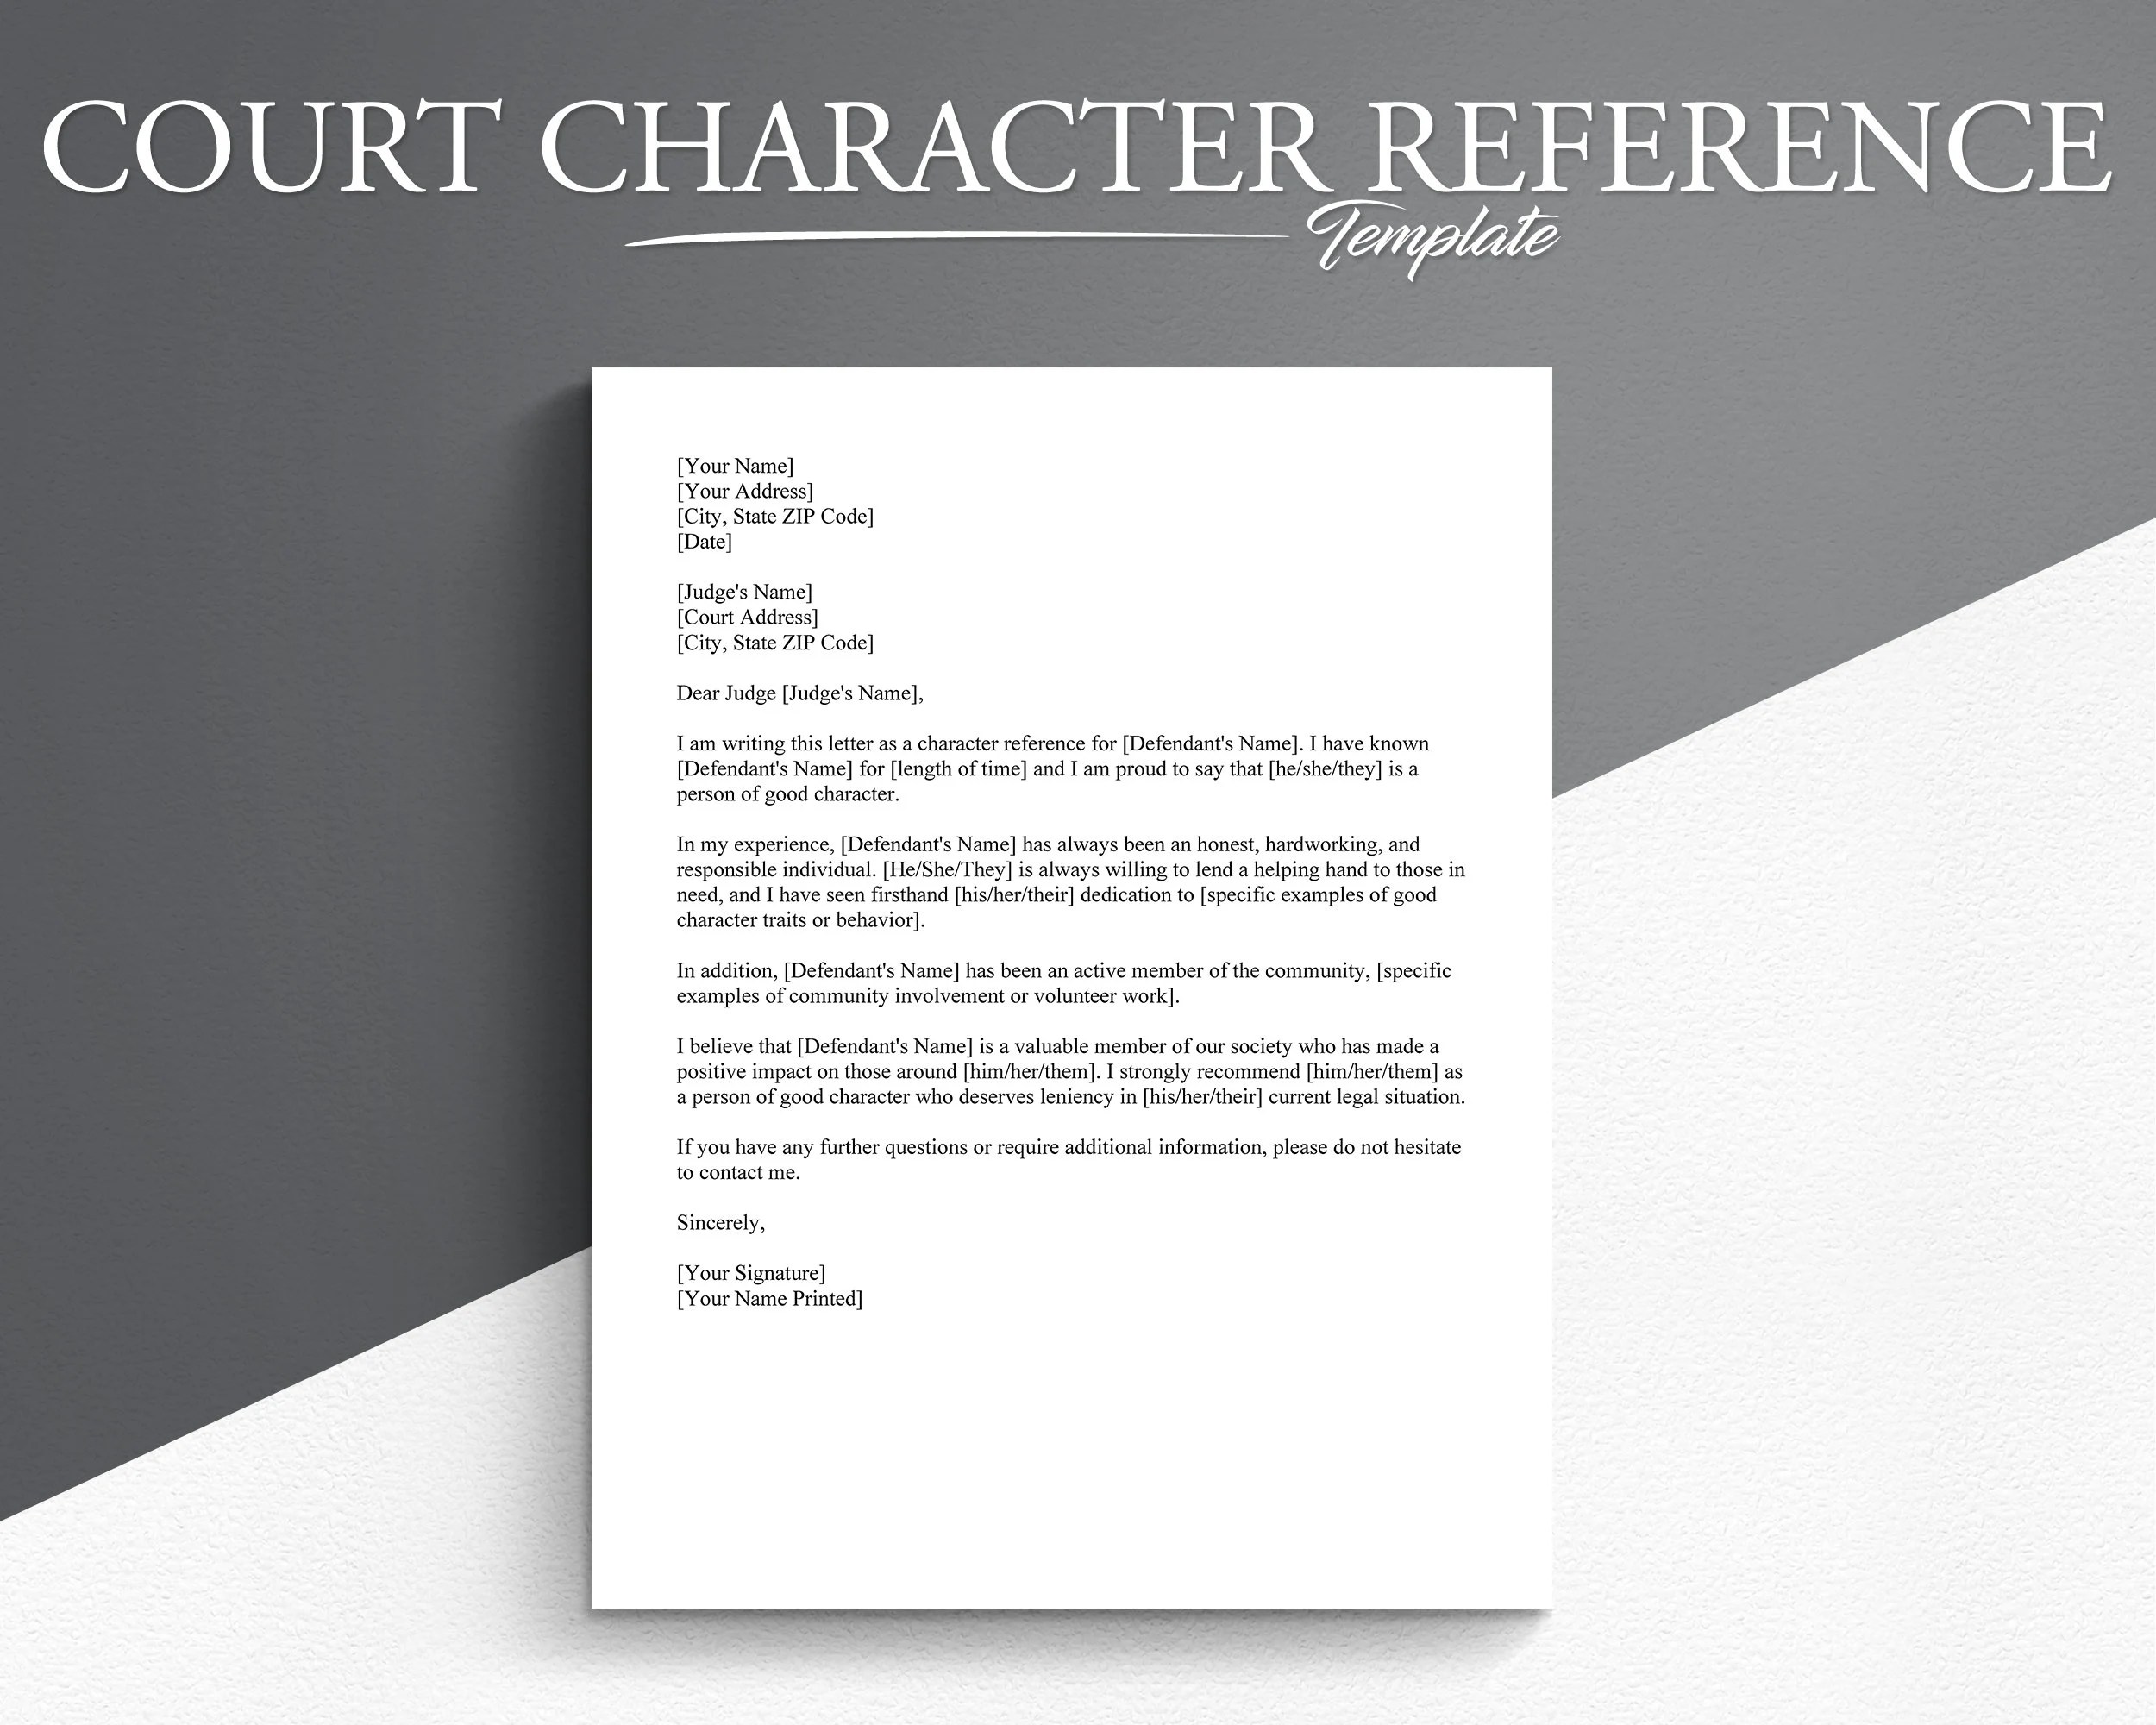 Sample Character Reference Letter For Court Pdf